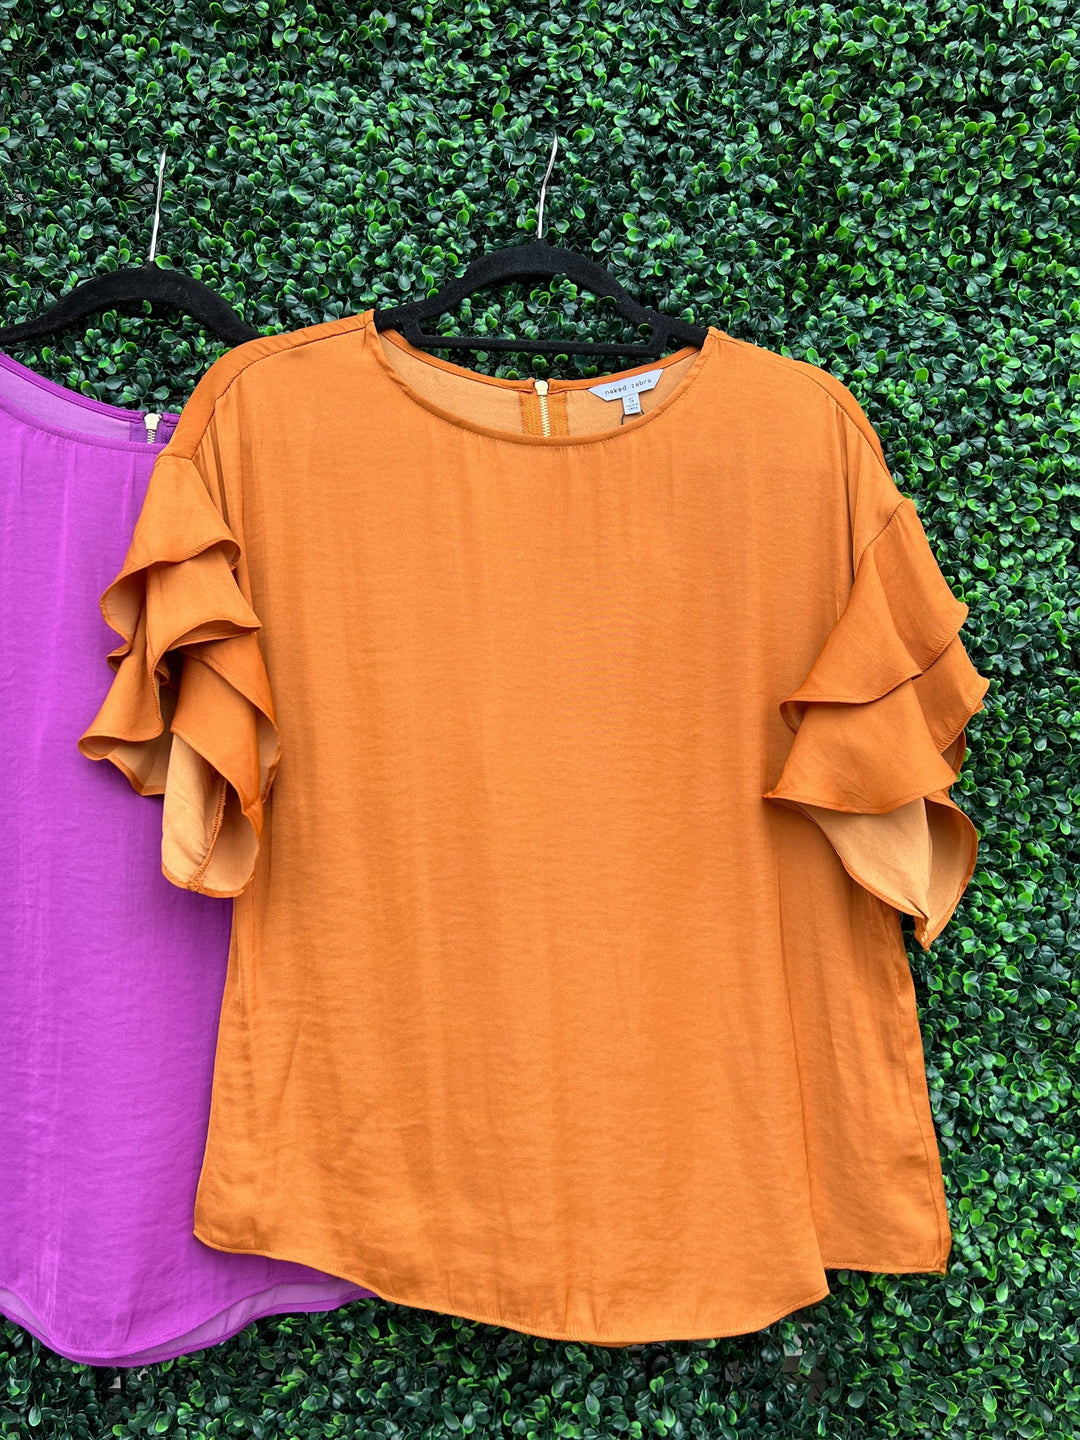 houston boutiques dresses and silky prange tops